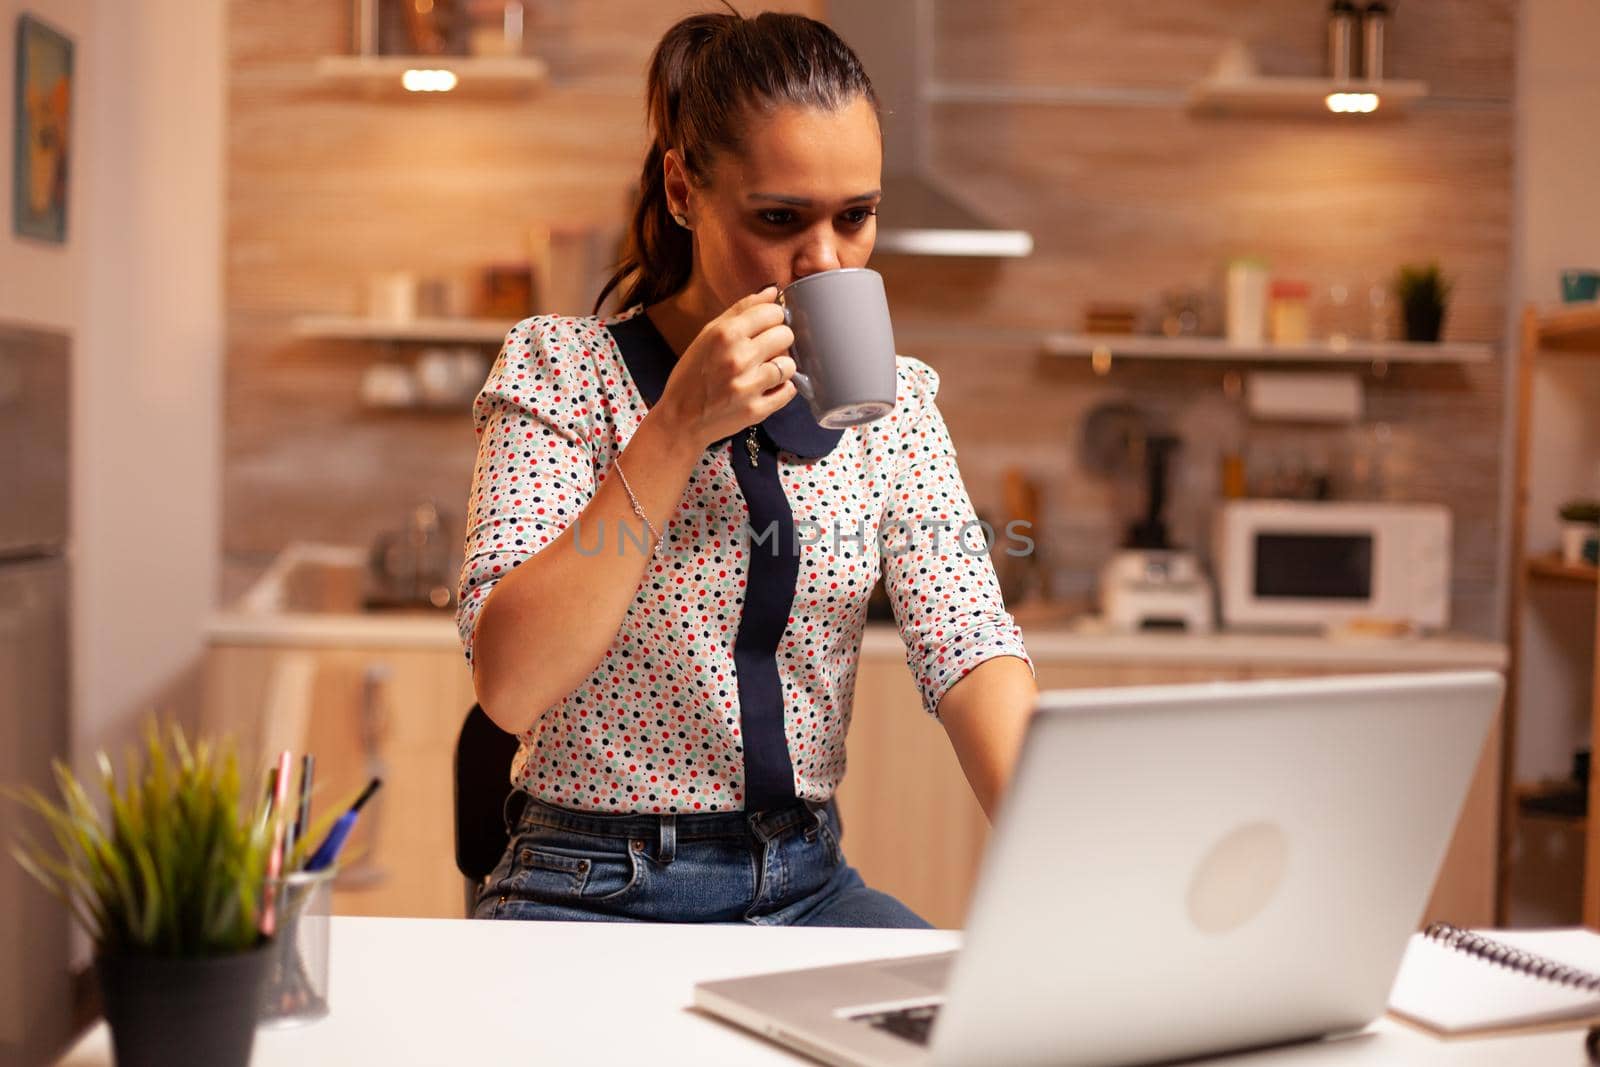 Woman taking a sip of coffee while working late at night on laptop in home kitchen for important project. Employee using modern technology at midnight doing overtime for job, business, busy, career.